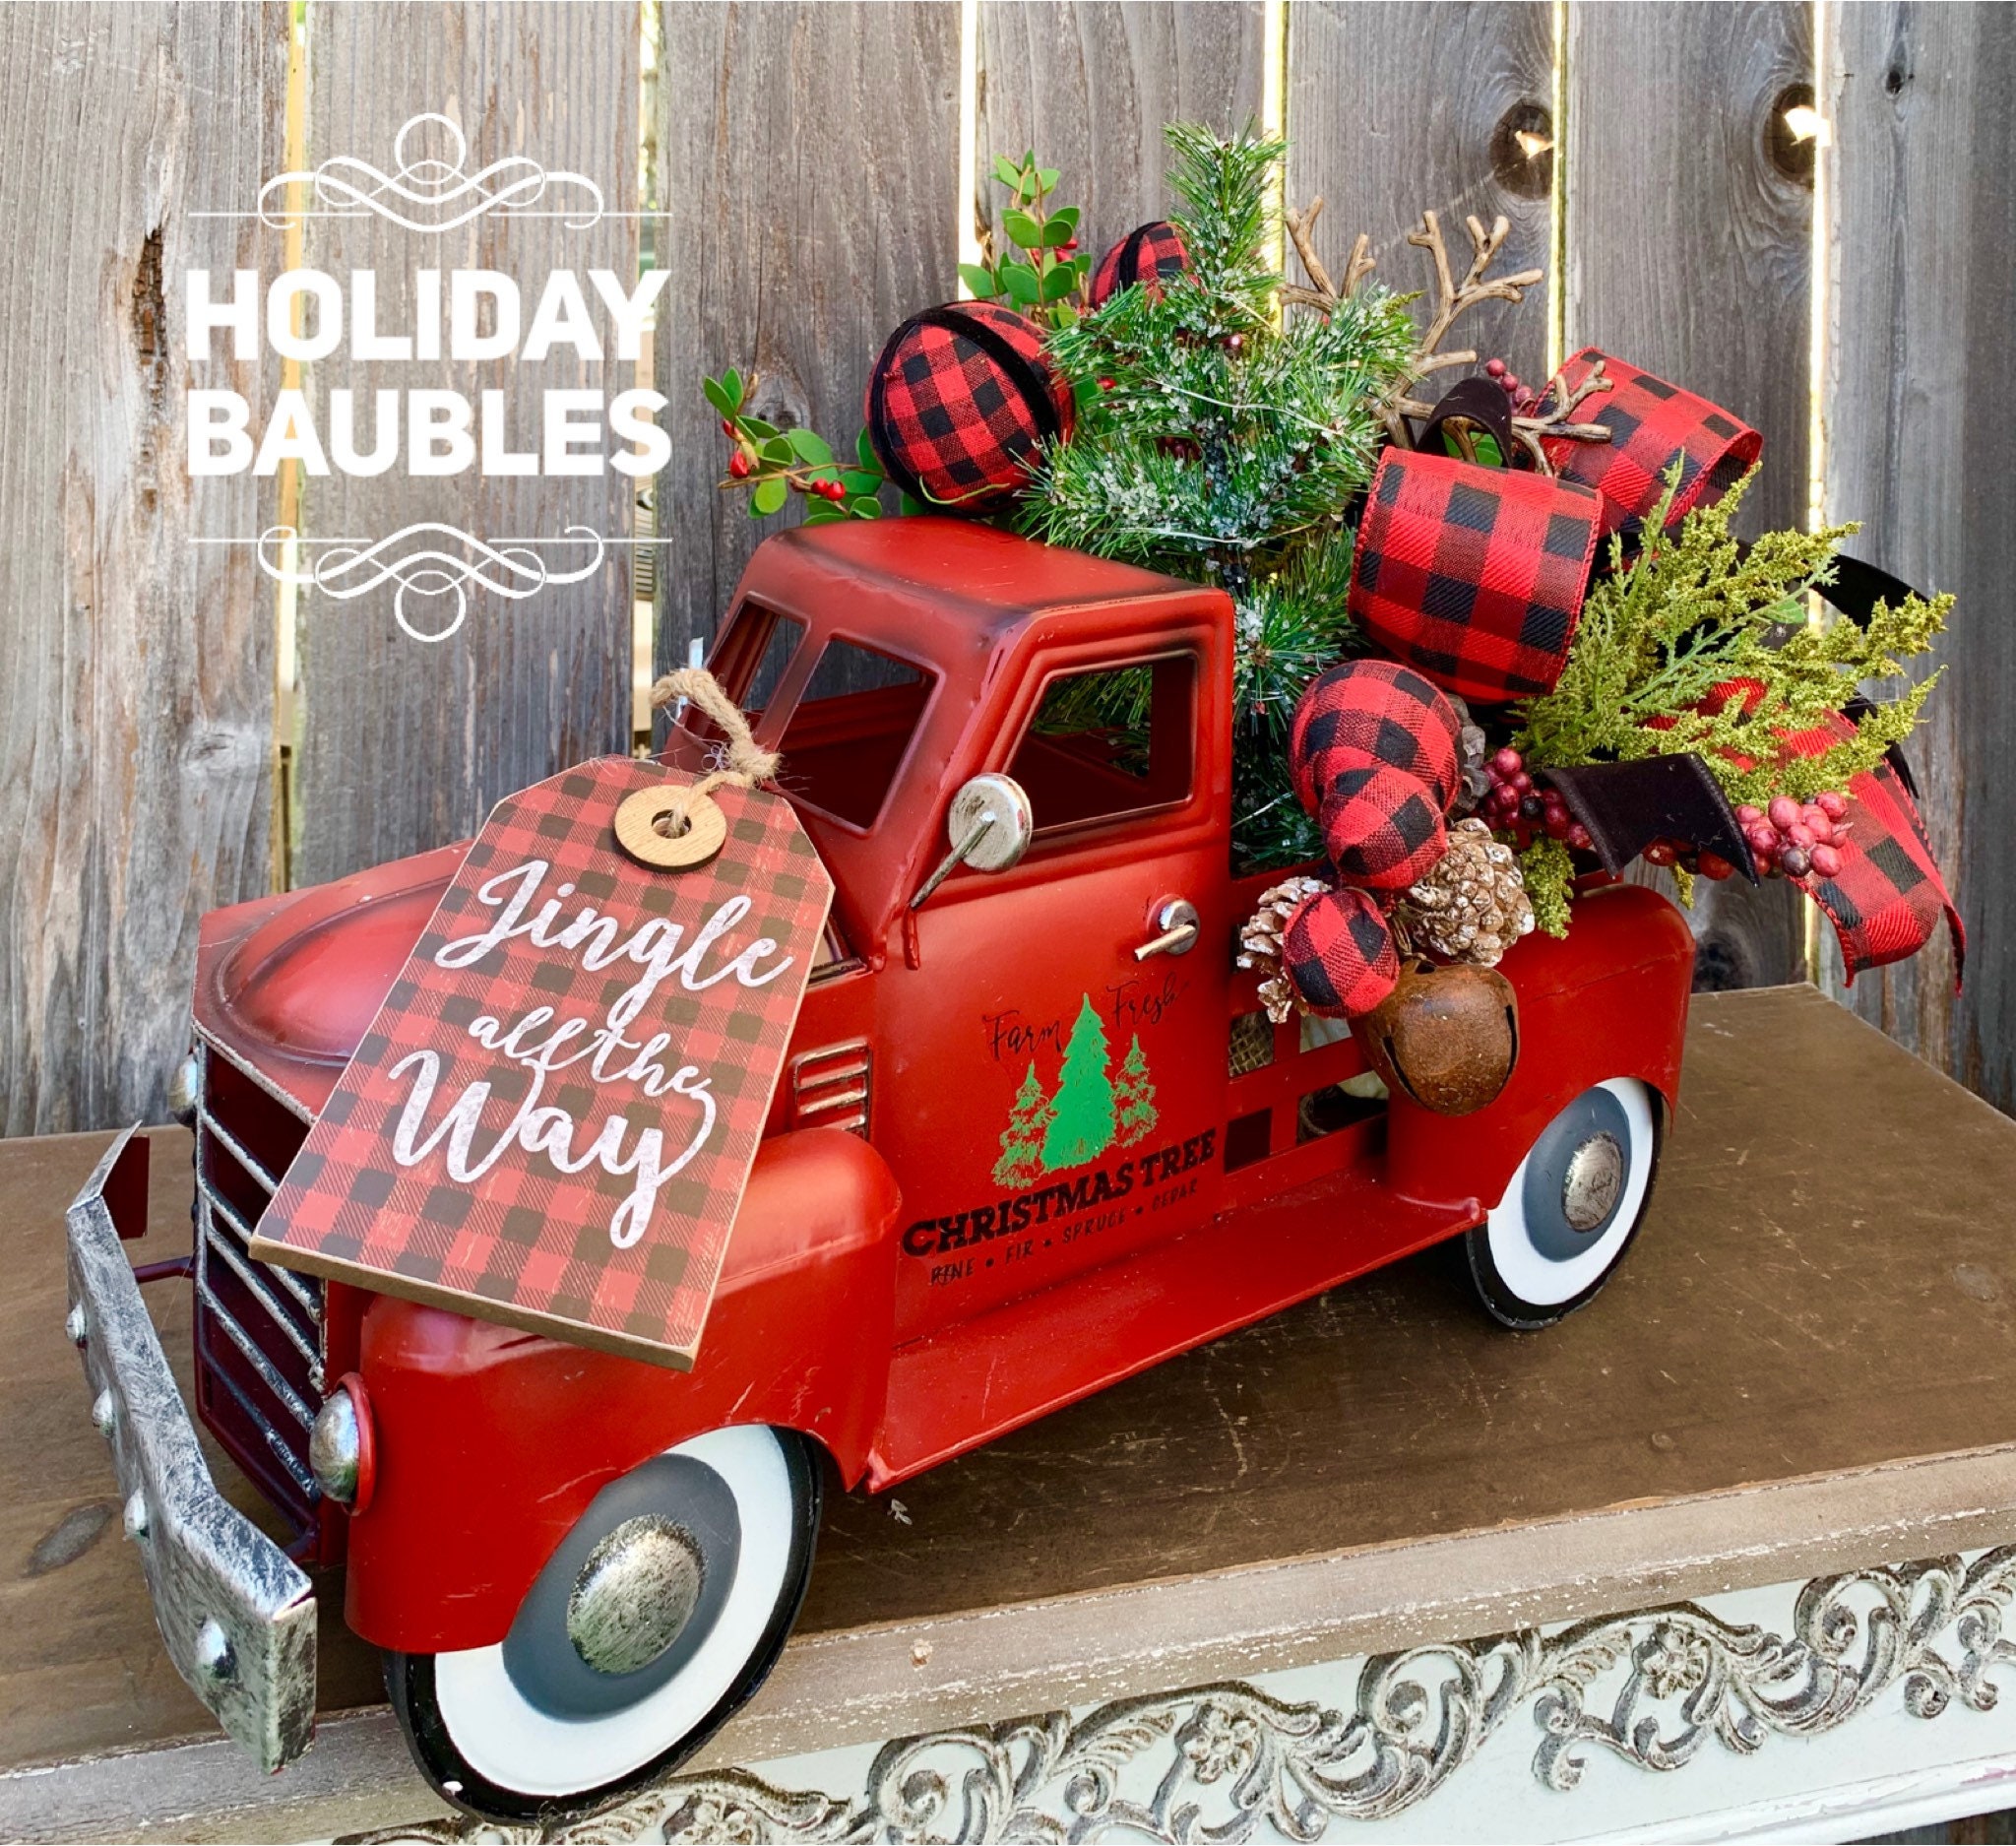 Red Truck Centerpiece Red Truck Decor Rustic Buffalo Plaid Christmas